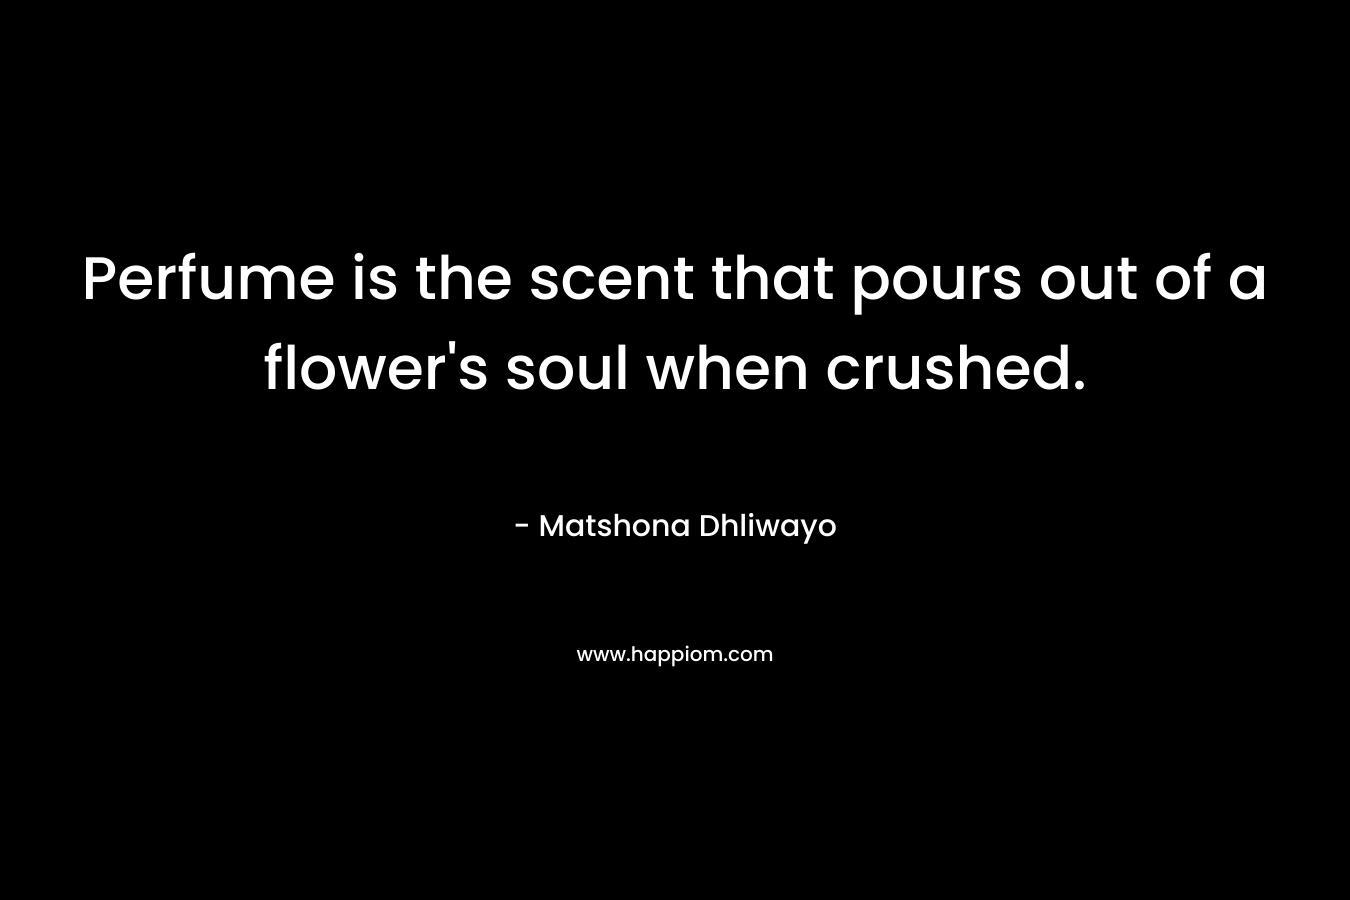 Perfume is the scent that pours out of a flower’s soul when crushed. – Matshona Dhliwayo